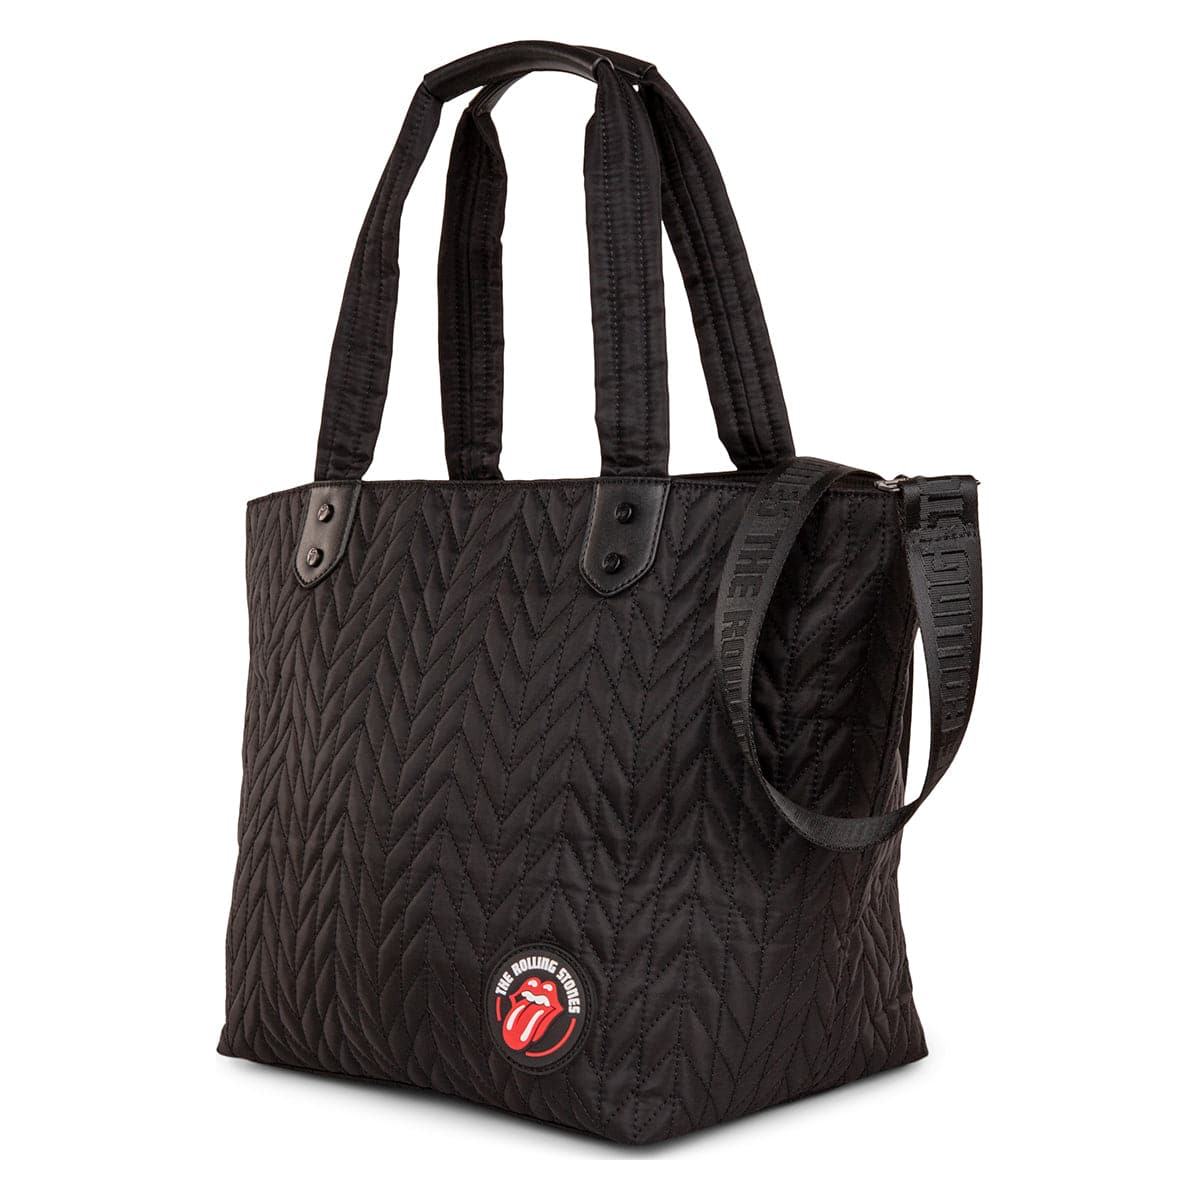 The Rolling Stones Iconic Quilted Tote Bag